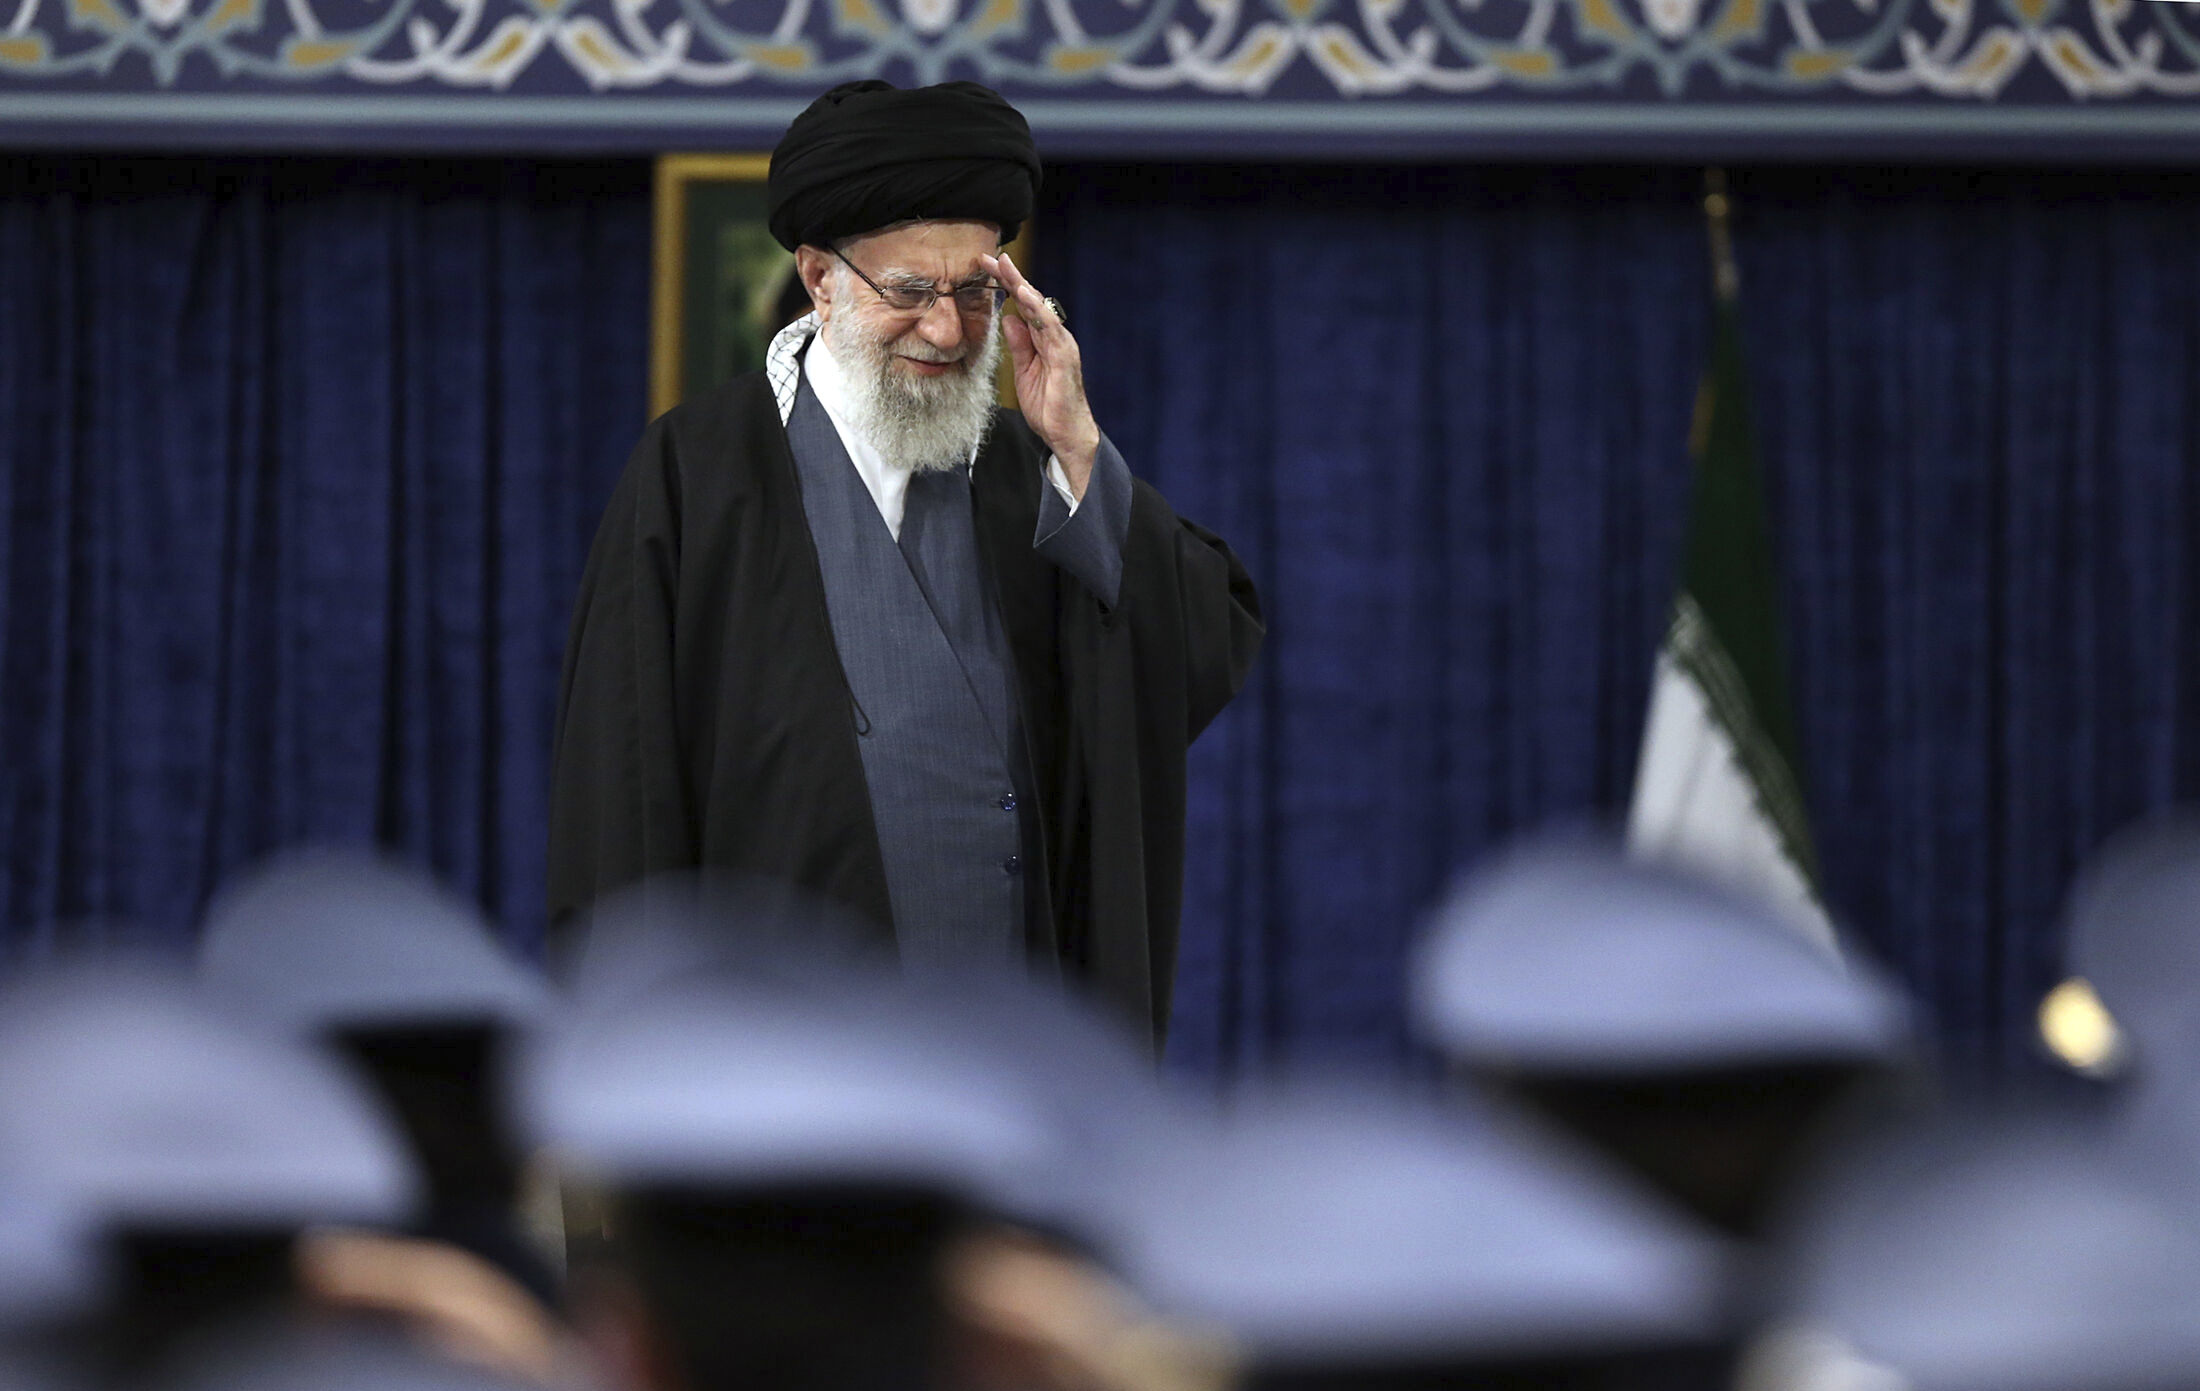 Iranian Supreme Leader Ayatollah Ali Khamenei salutes during a meeting with military staff in Tehran on Monday.